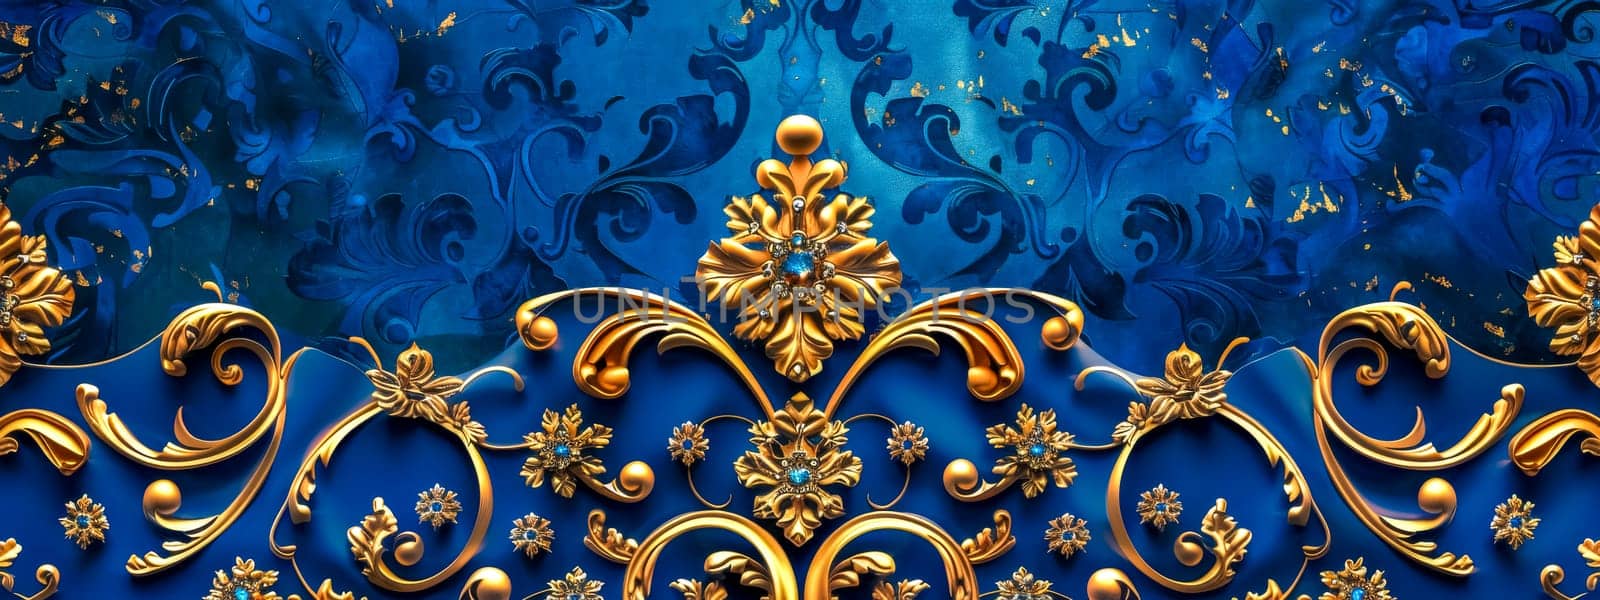 Luxurious golden floral ornaments on blue background by Edophoto